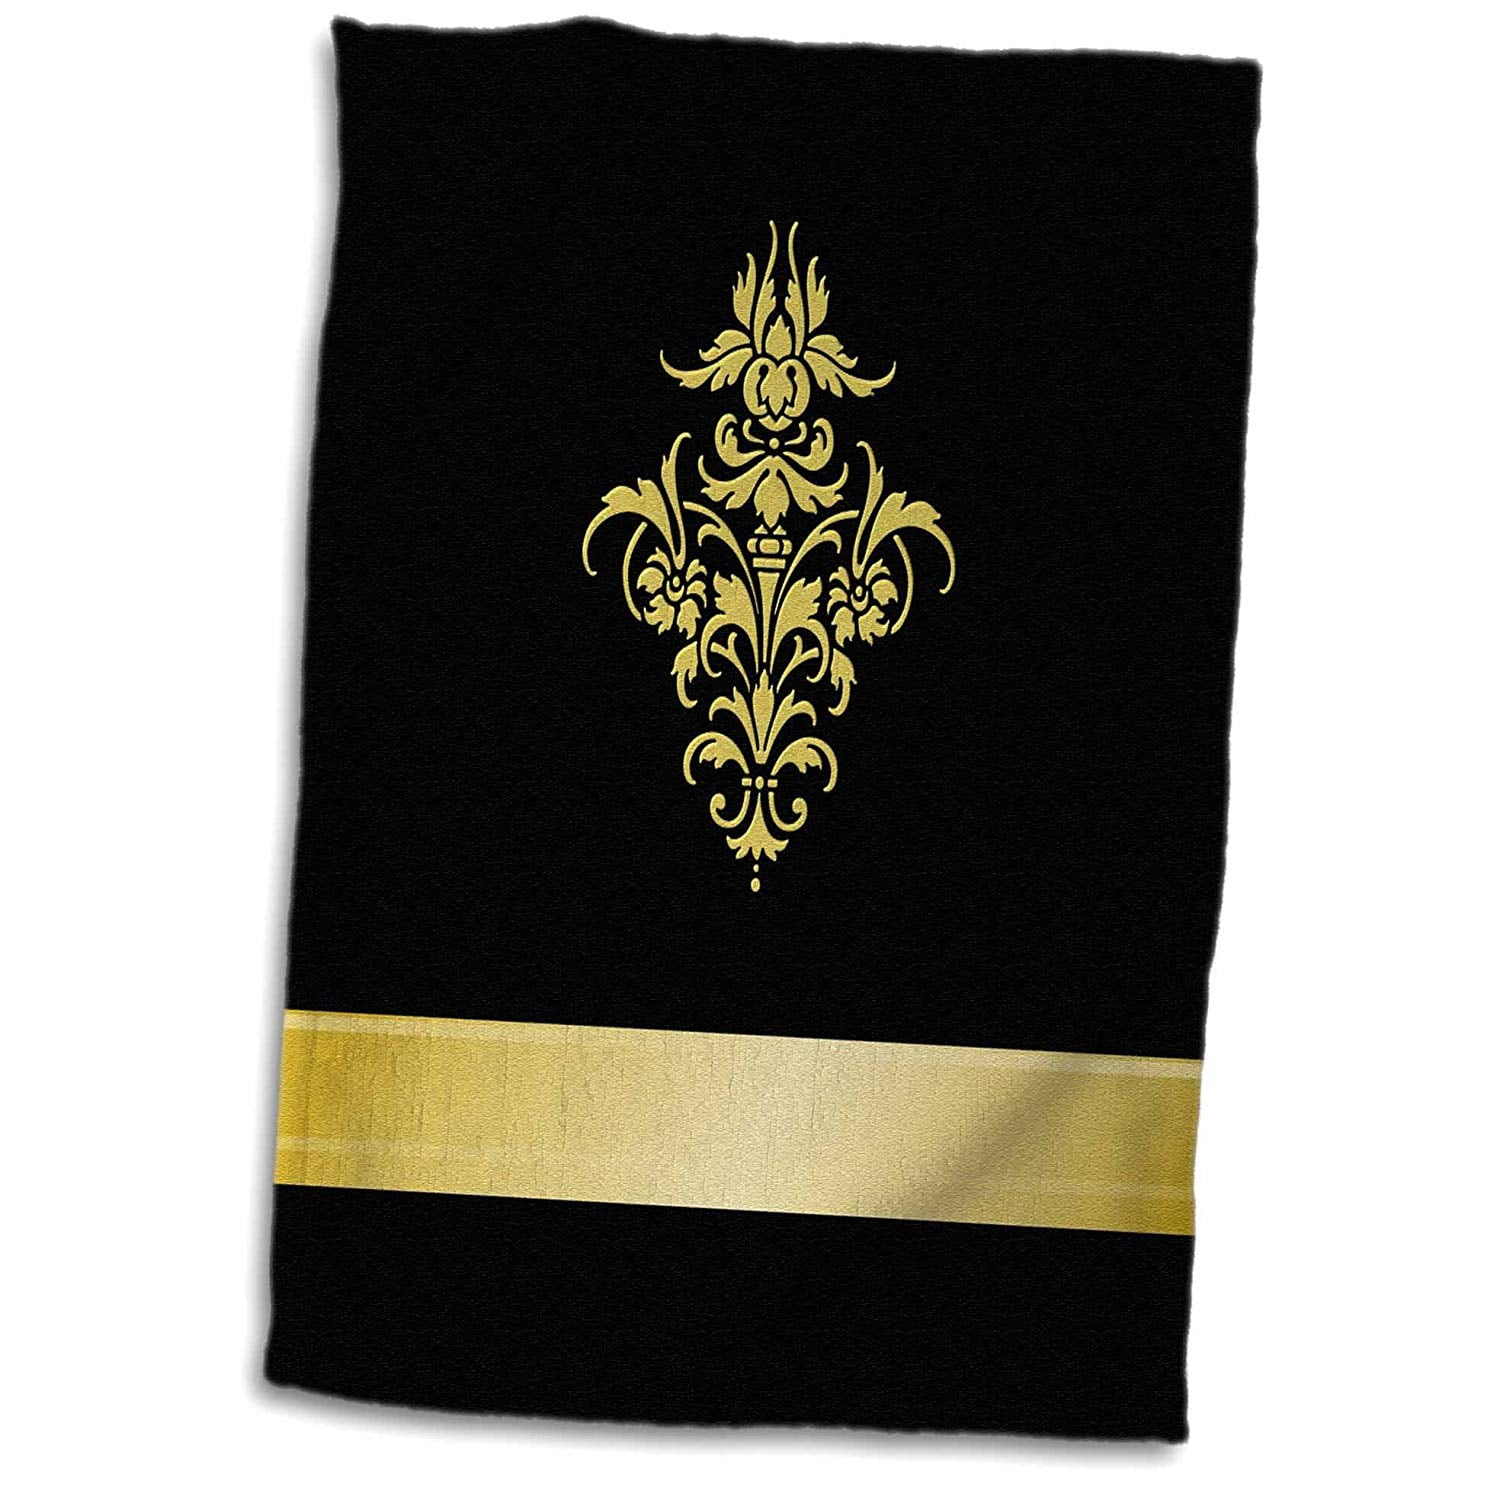 3D Rose Ribbon and Bow On Damask Design-Black and Gold Hand Towel 15 x 22 3dRose twl_223591_1 